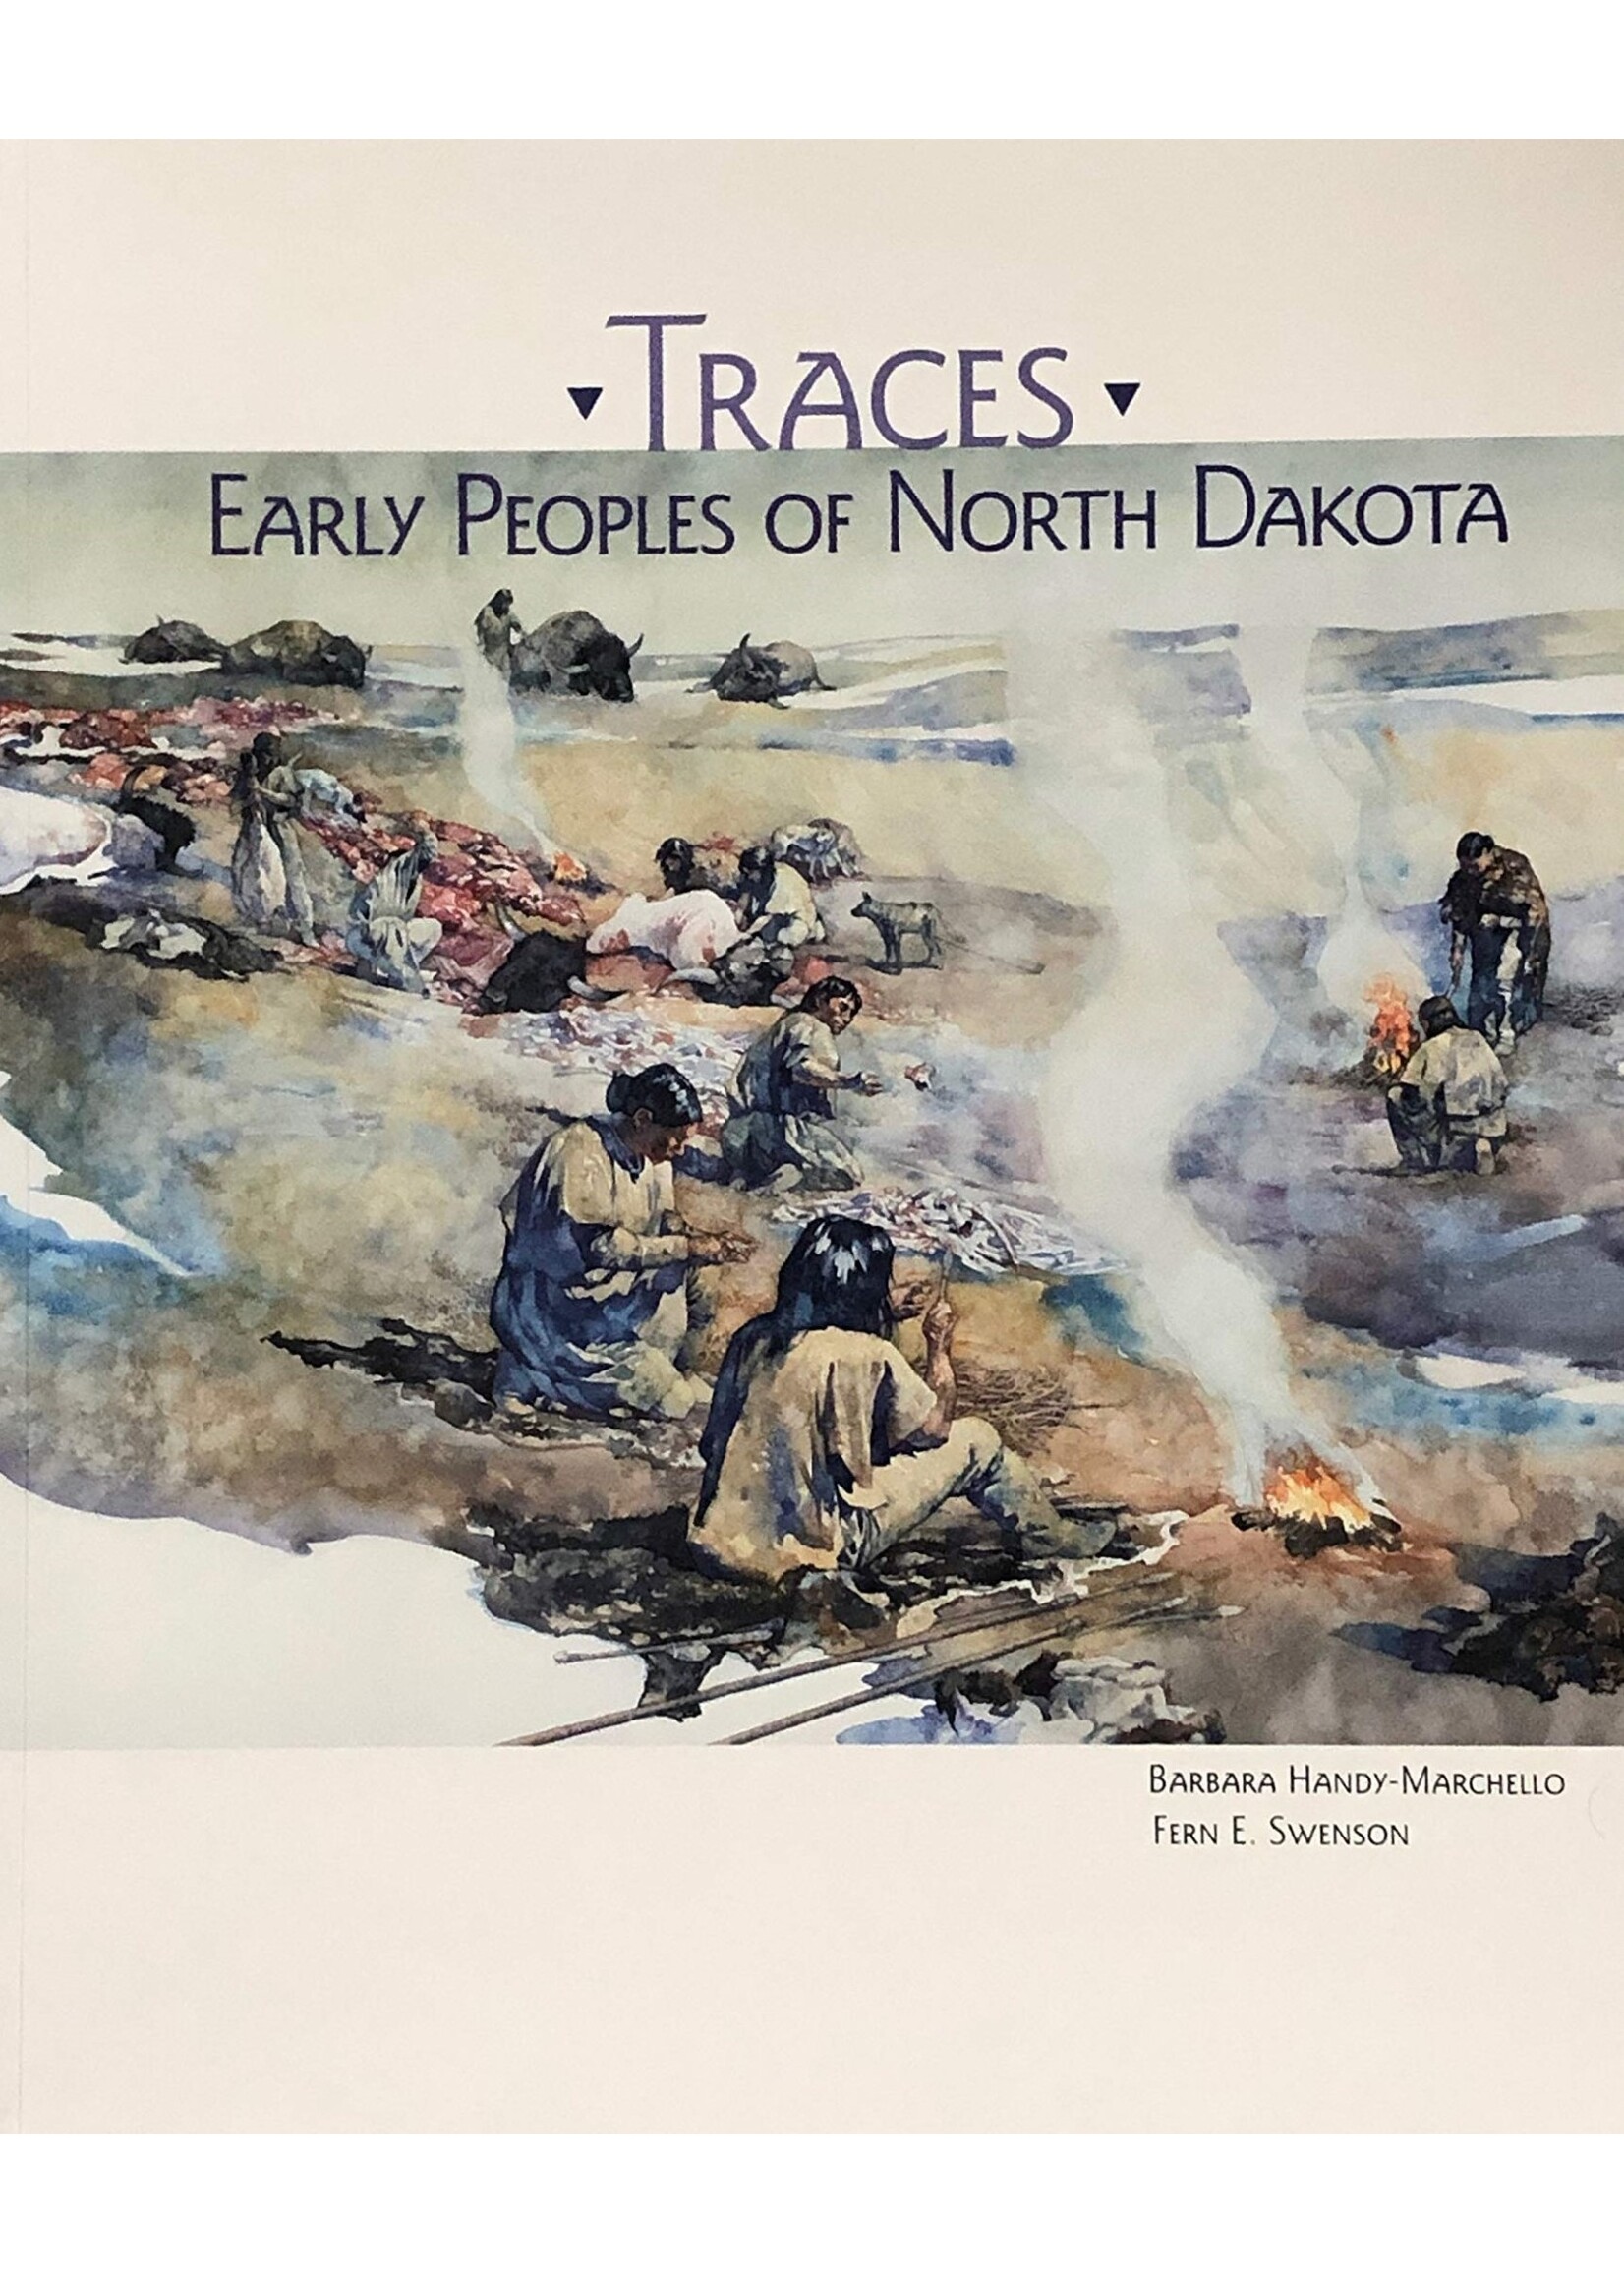 Traces: Early Peoples of North Dakota